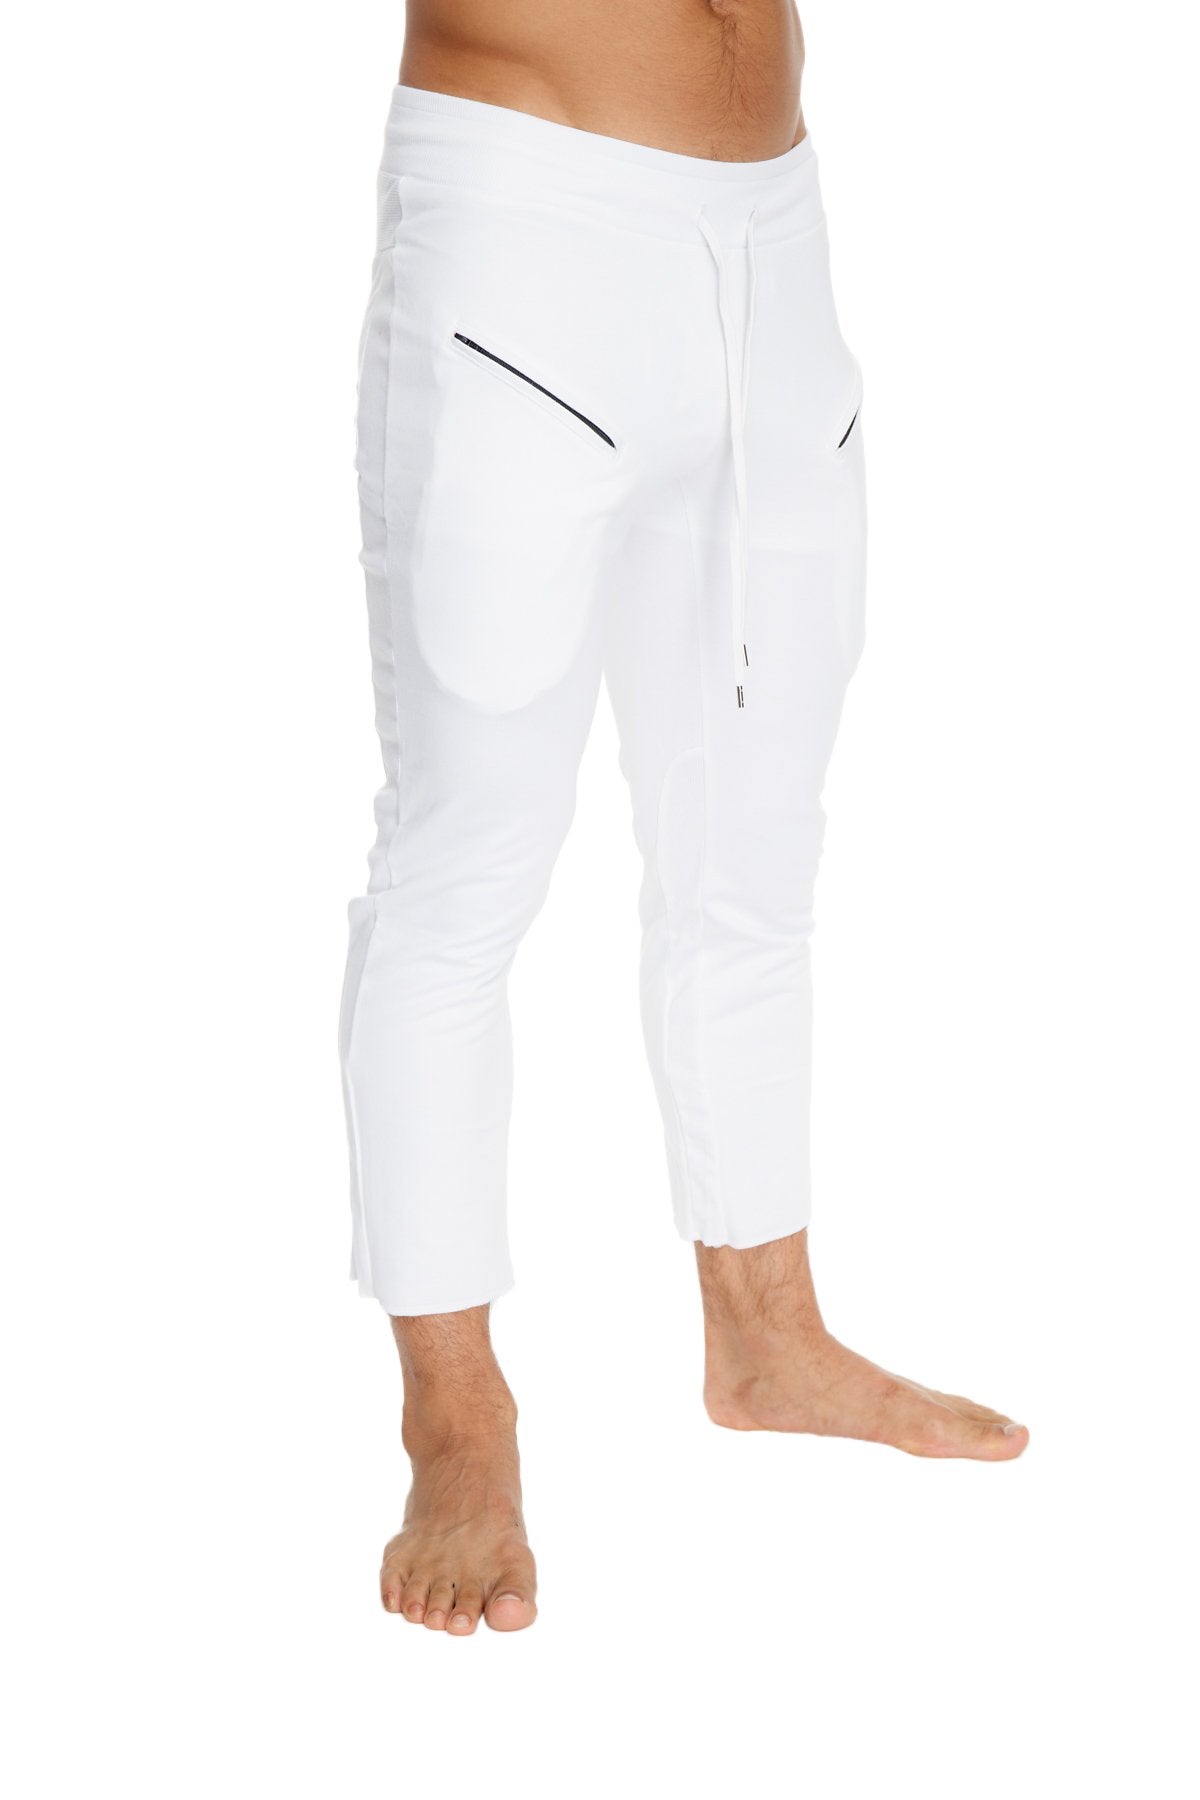 White Yoga Shorts Mens Trousers  International Society of Precision  Agriculture